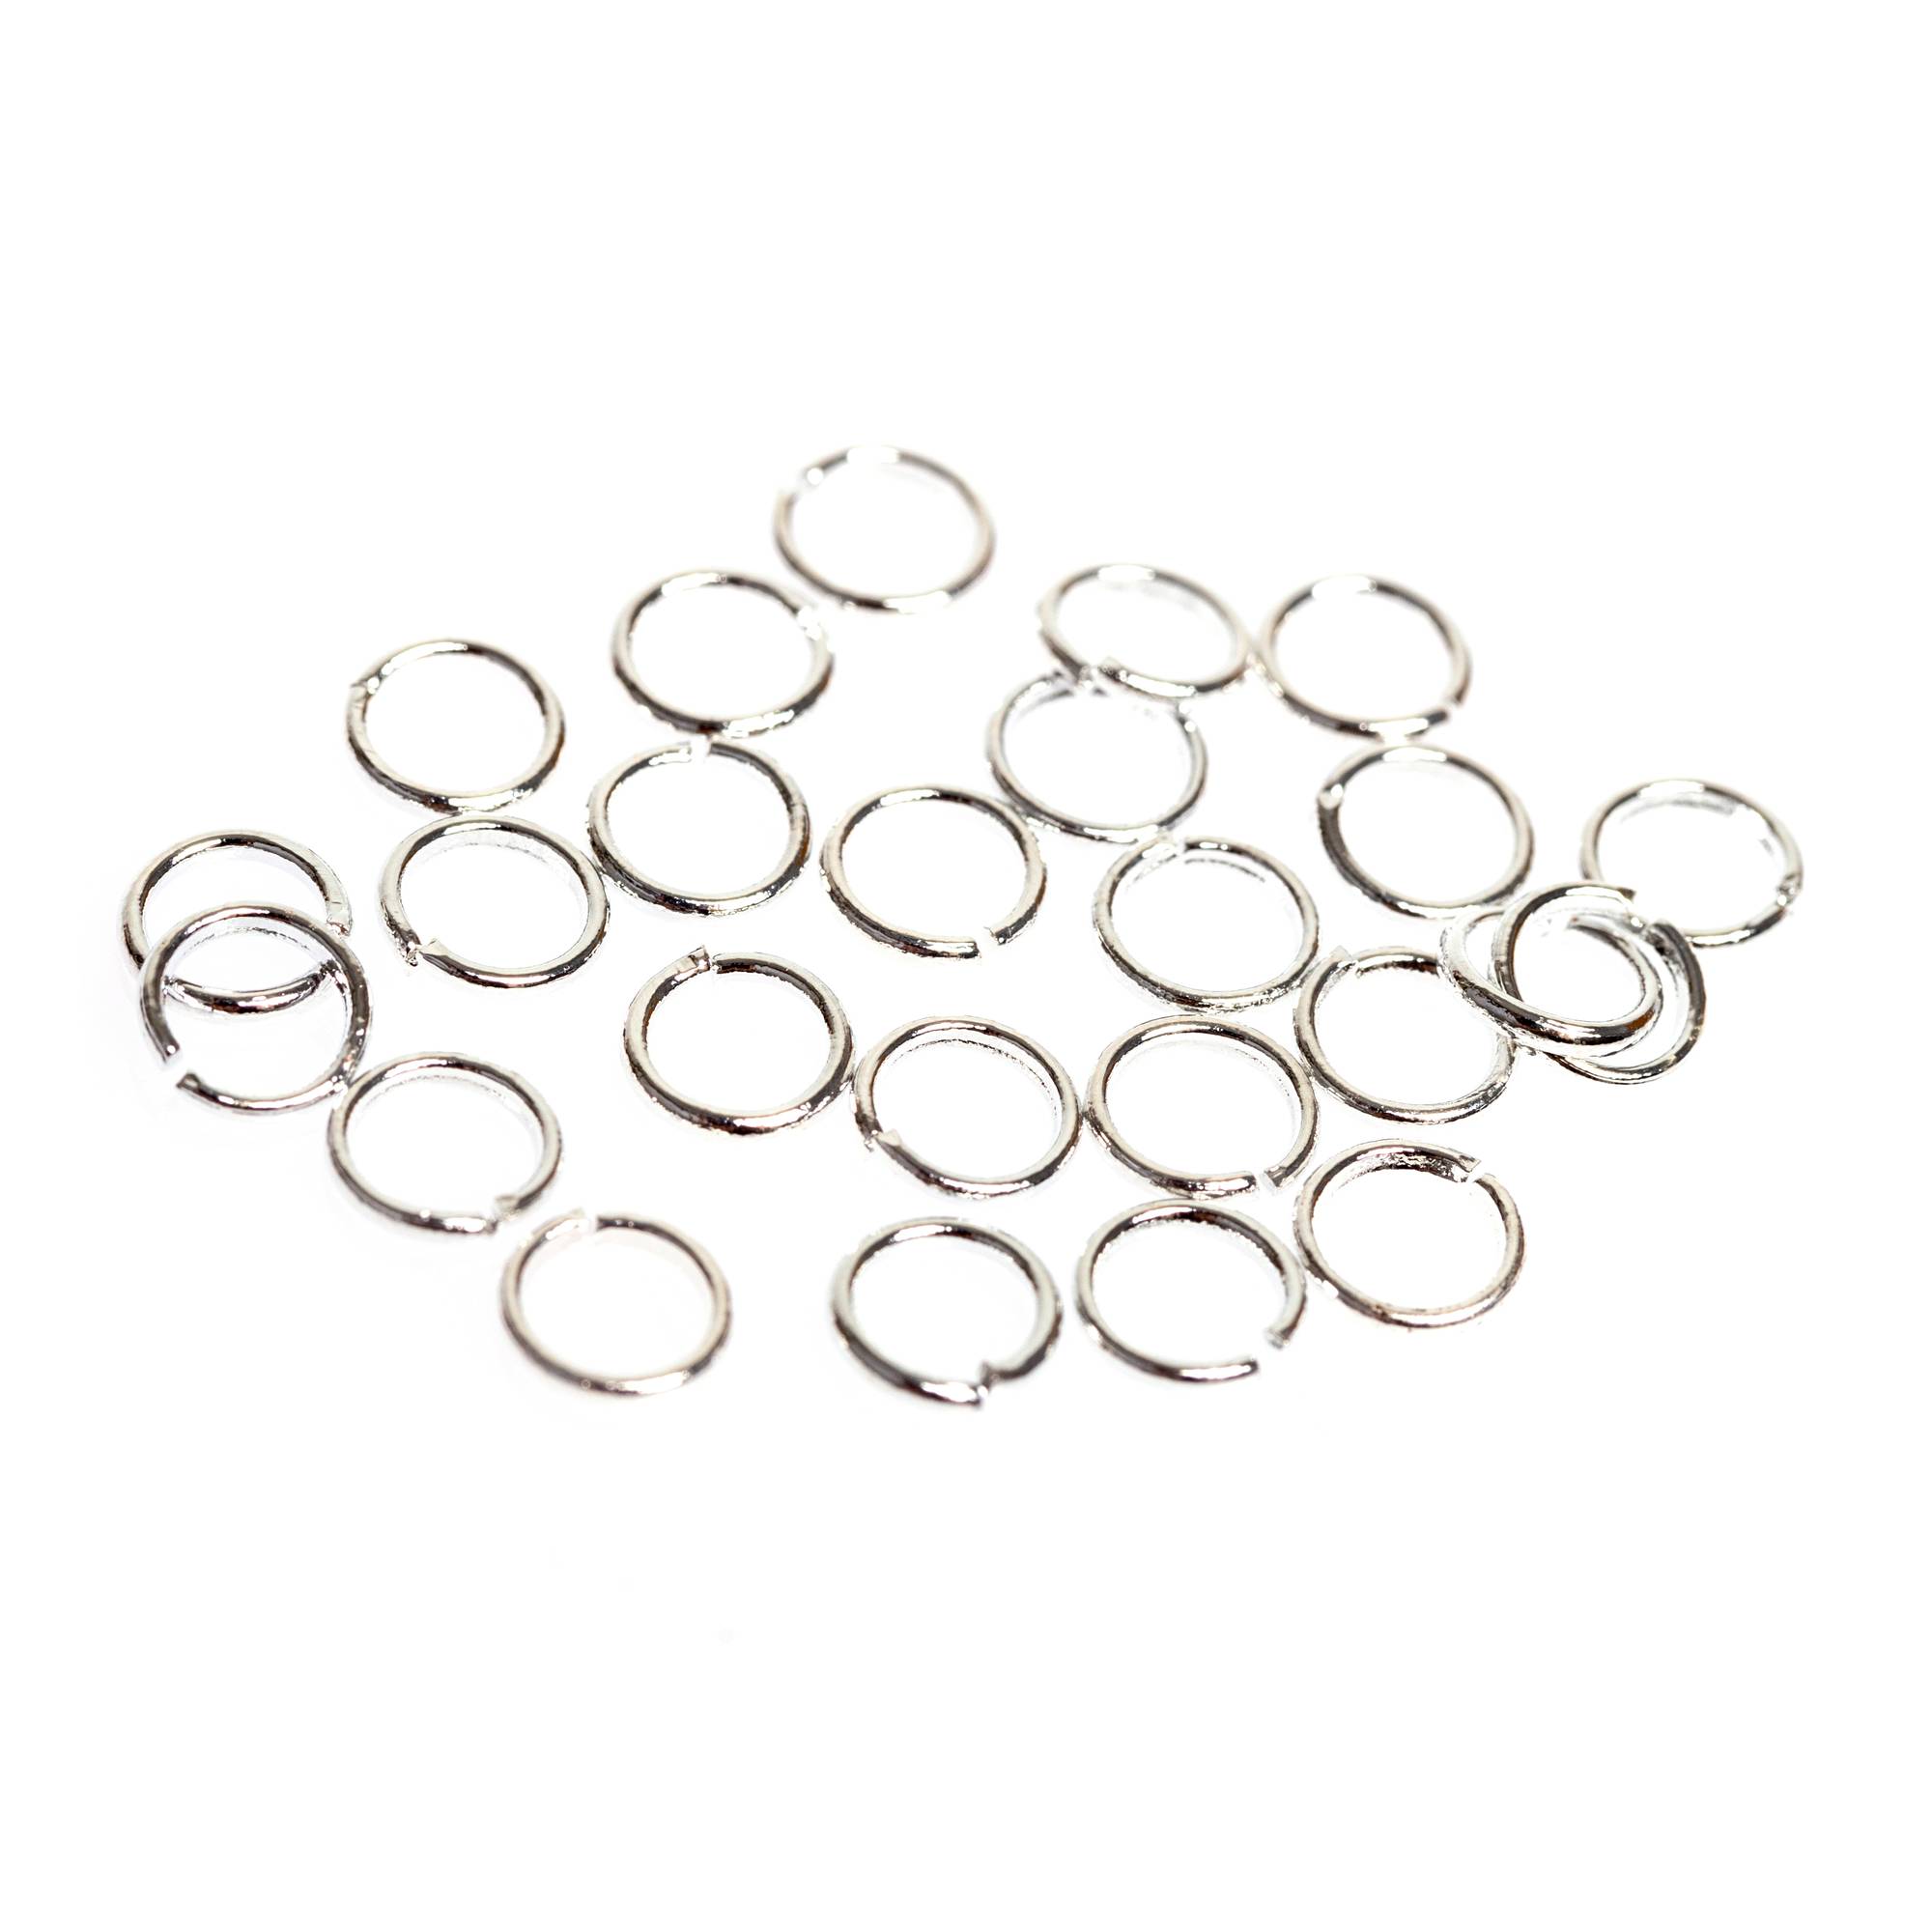 Beads Unlimited Silver Plated Jump Rings 5mm 25 Pack